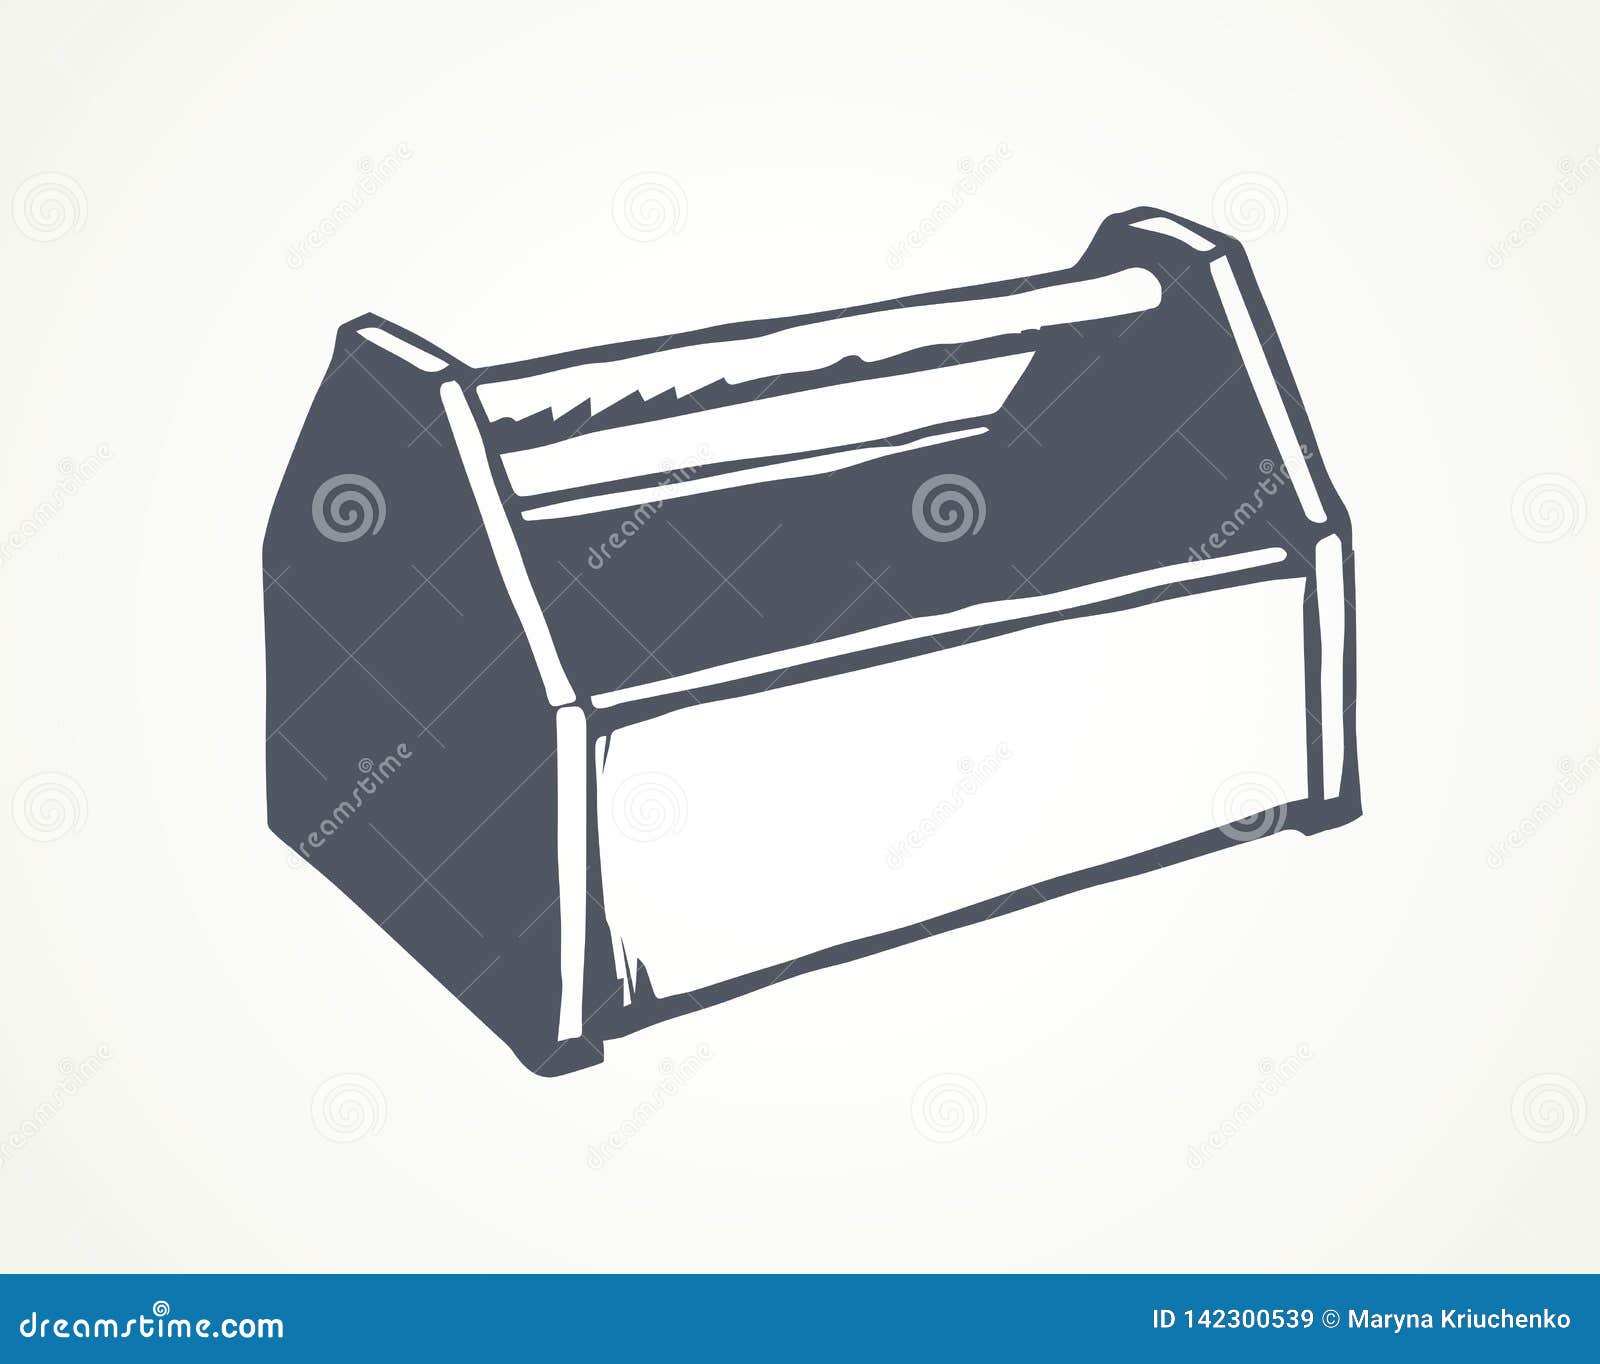 Tool box. Vector drawing stock vector. Illustration of building - 142300539